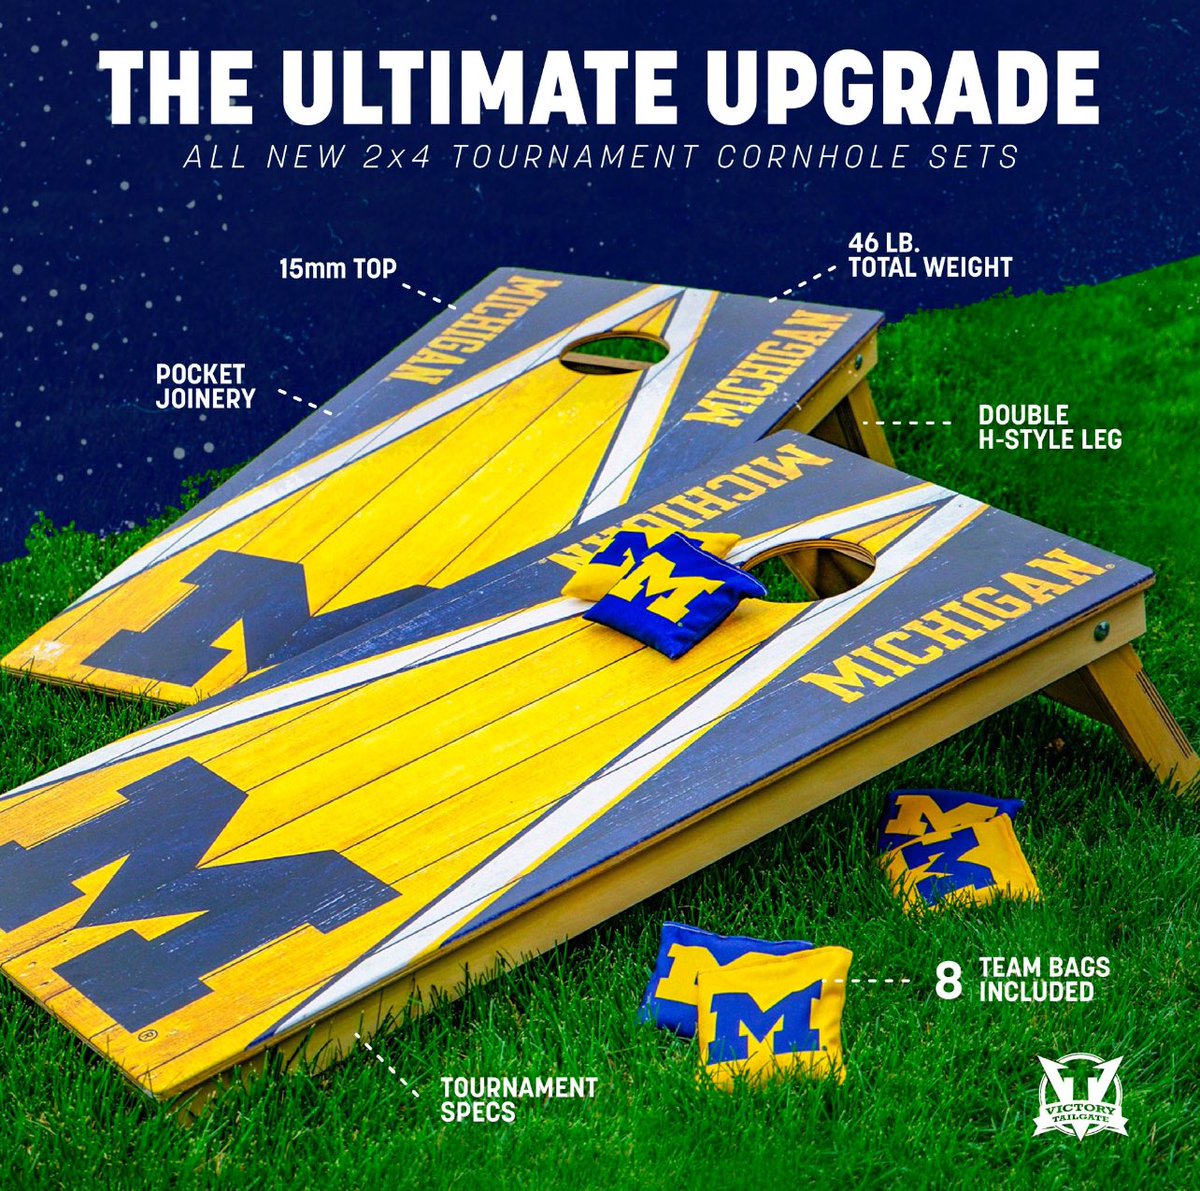 Check this out! victorytailgate.pxf.io/shop-cornhole

The Ultimate Upgrade 
#CornholeTournament #TailgateParty #GameDayReady